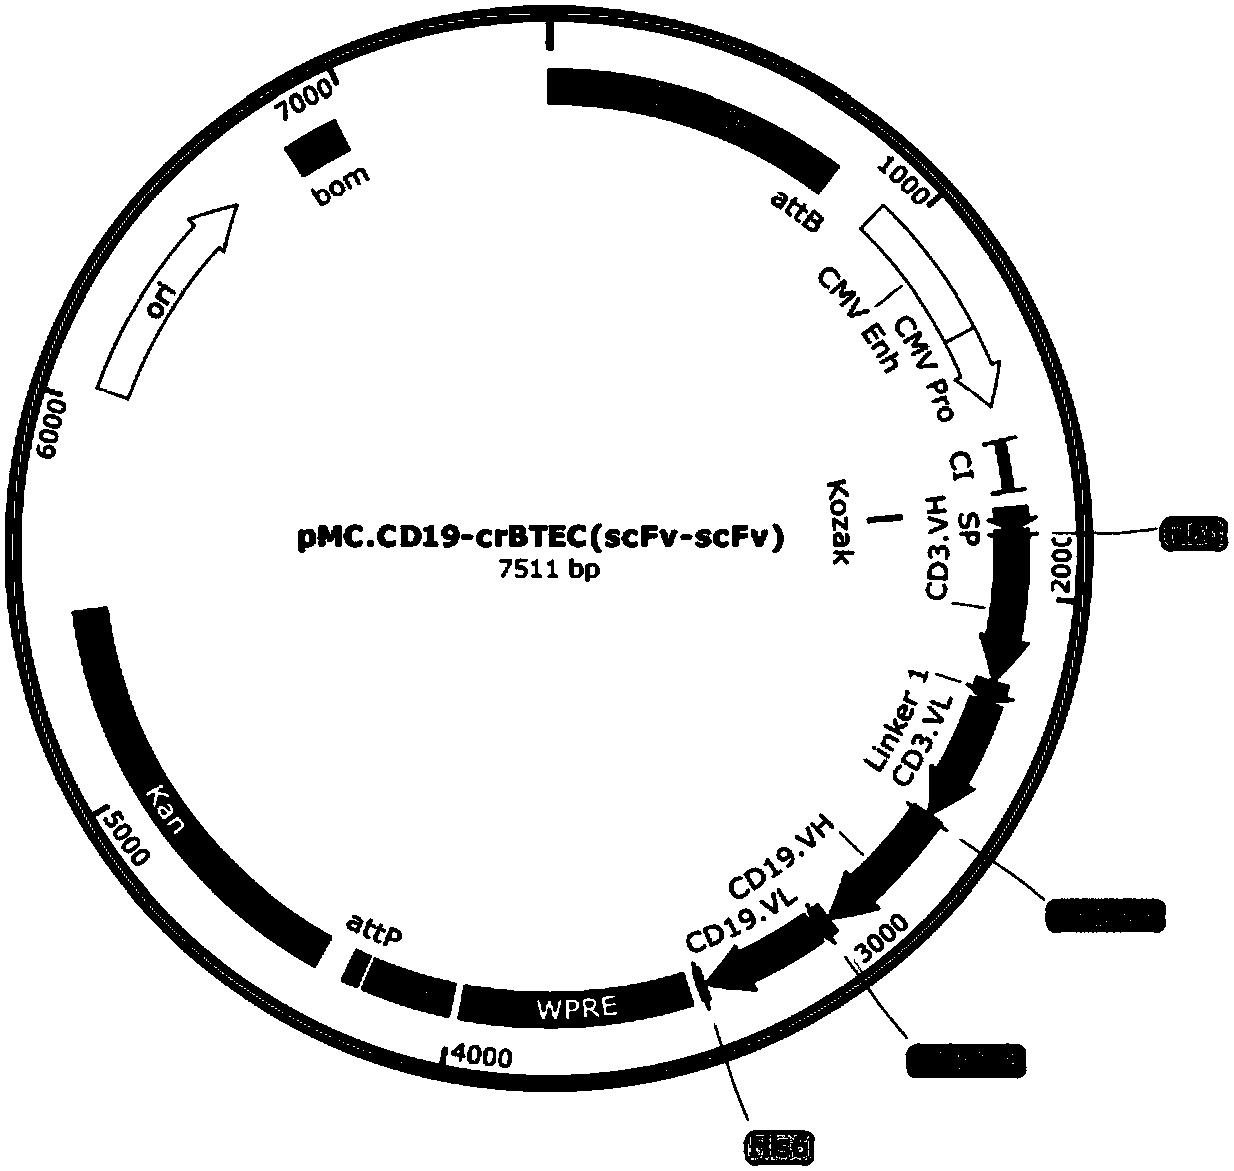 Minicircle DNA expression bridging molecules for connecting human and animal target cells with effector cells, and application of minicircle DNA expression bridging molecules